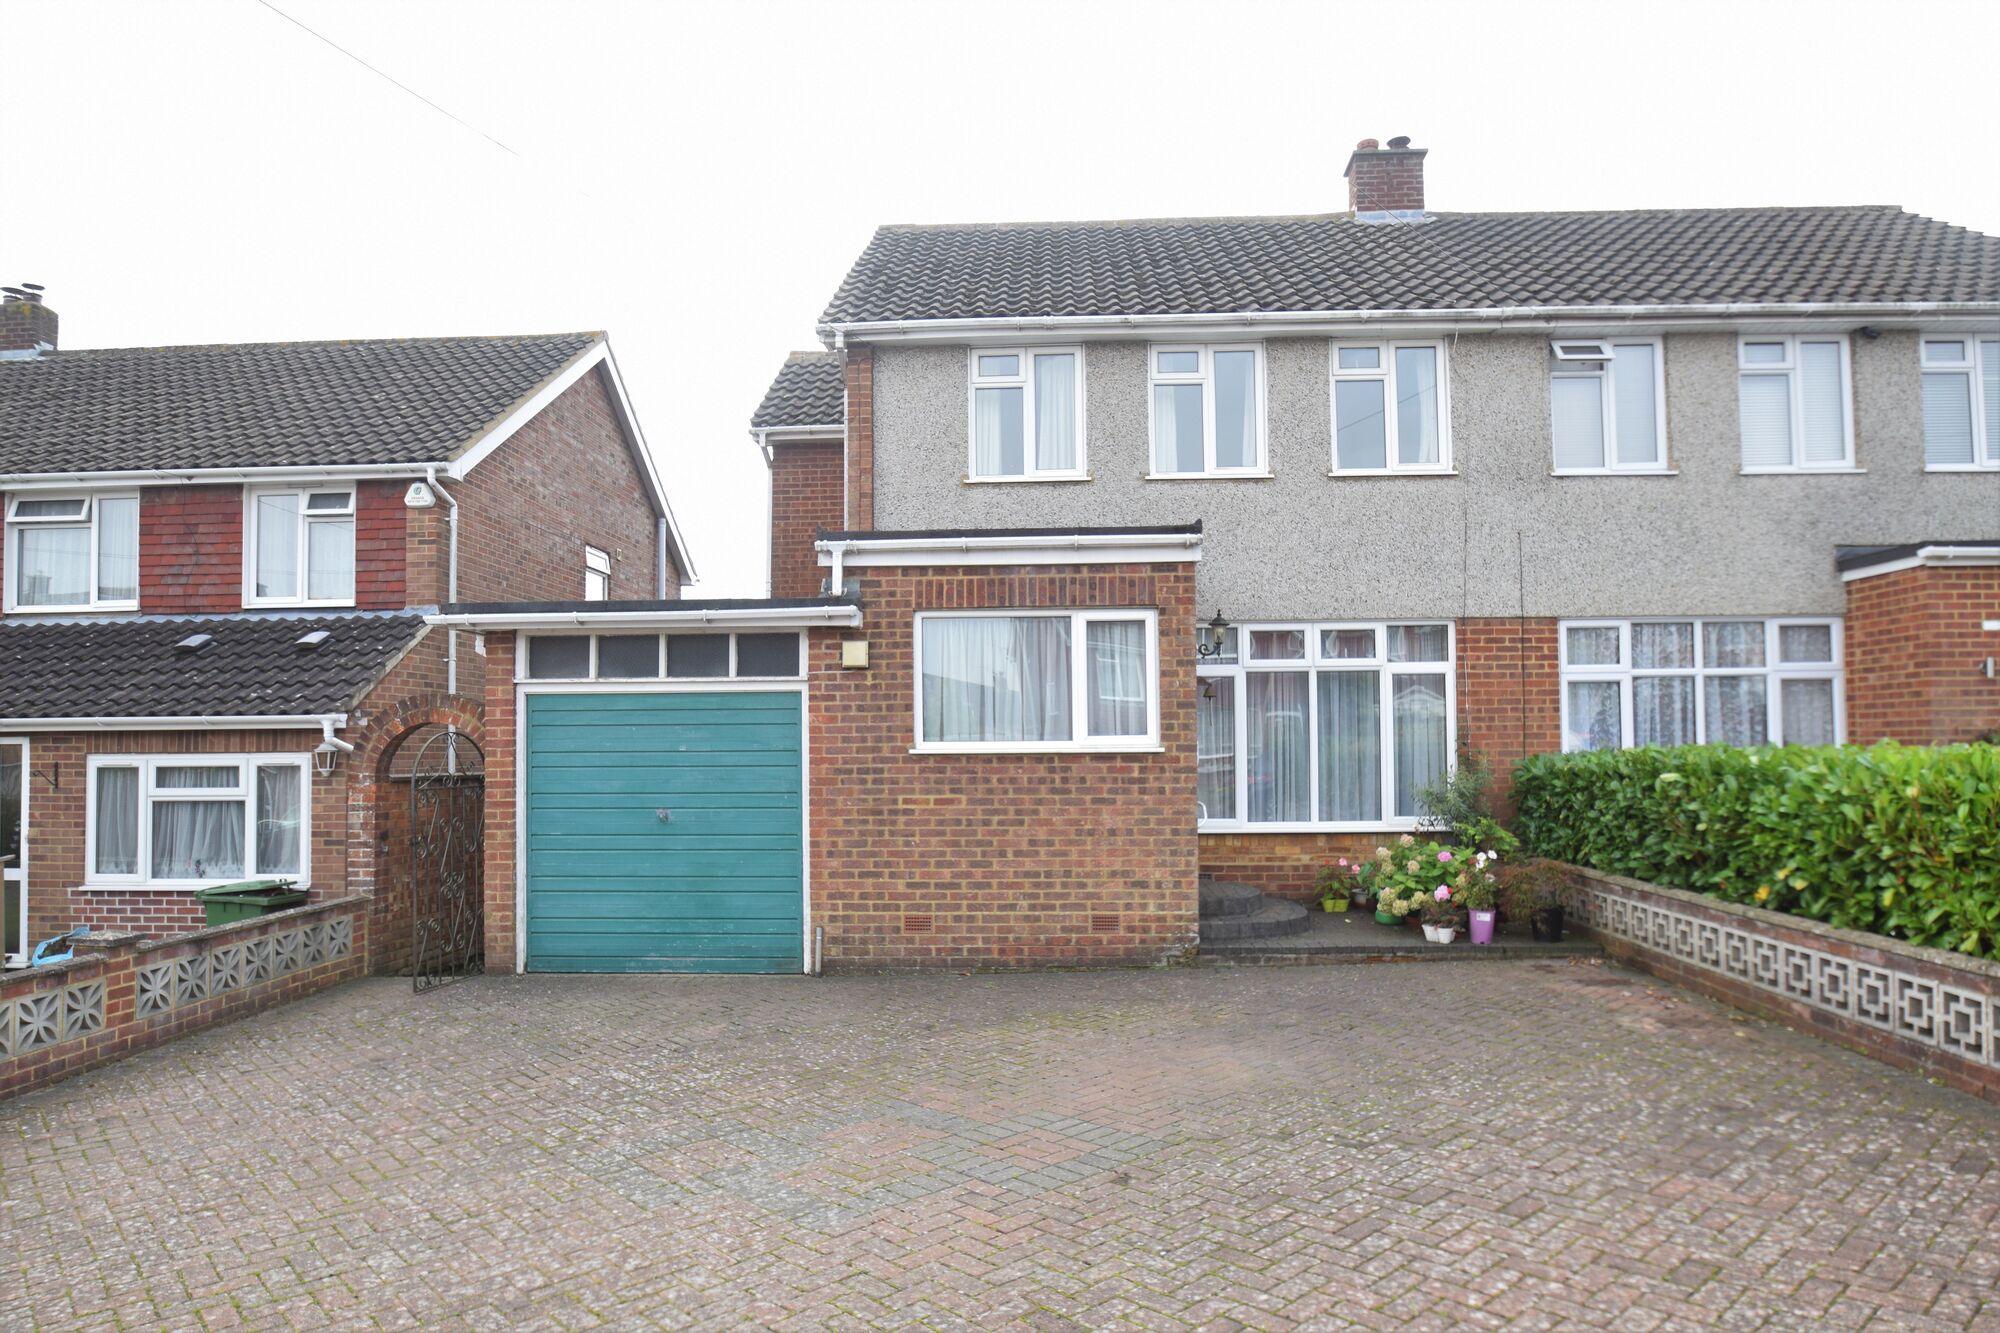 3 bedroom semi detached house to rent, Available unfurnished from 16/09/2024 Stephenson Close, High Wycombe, HP13, main image